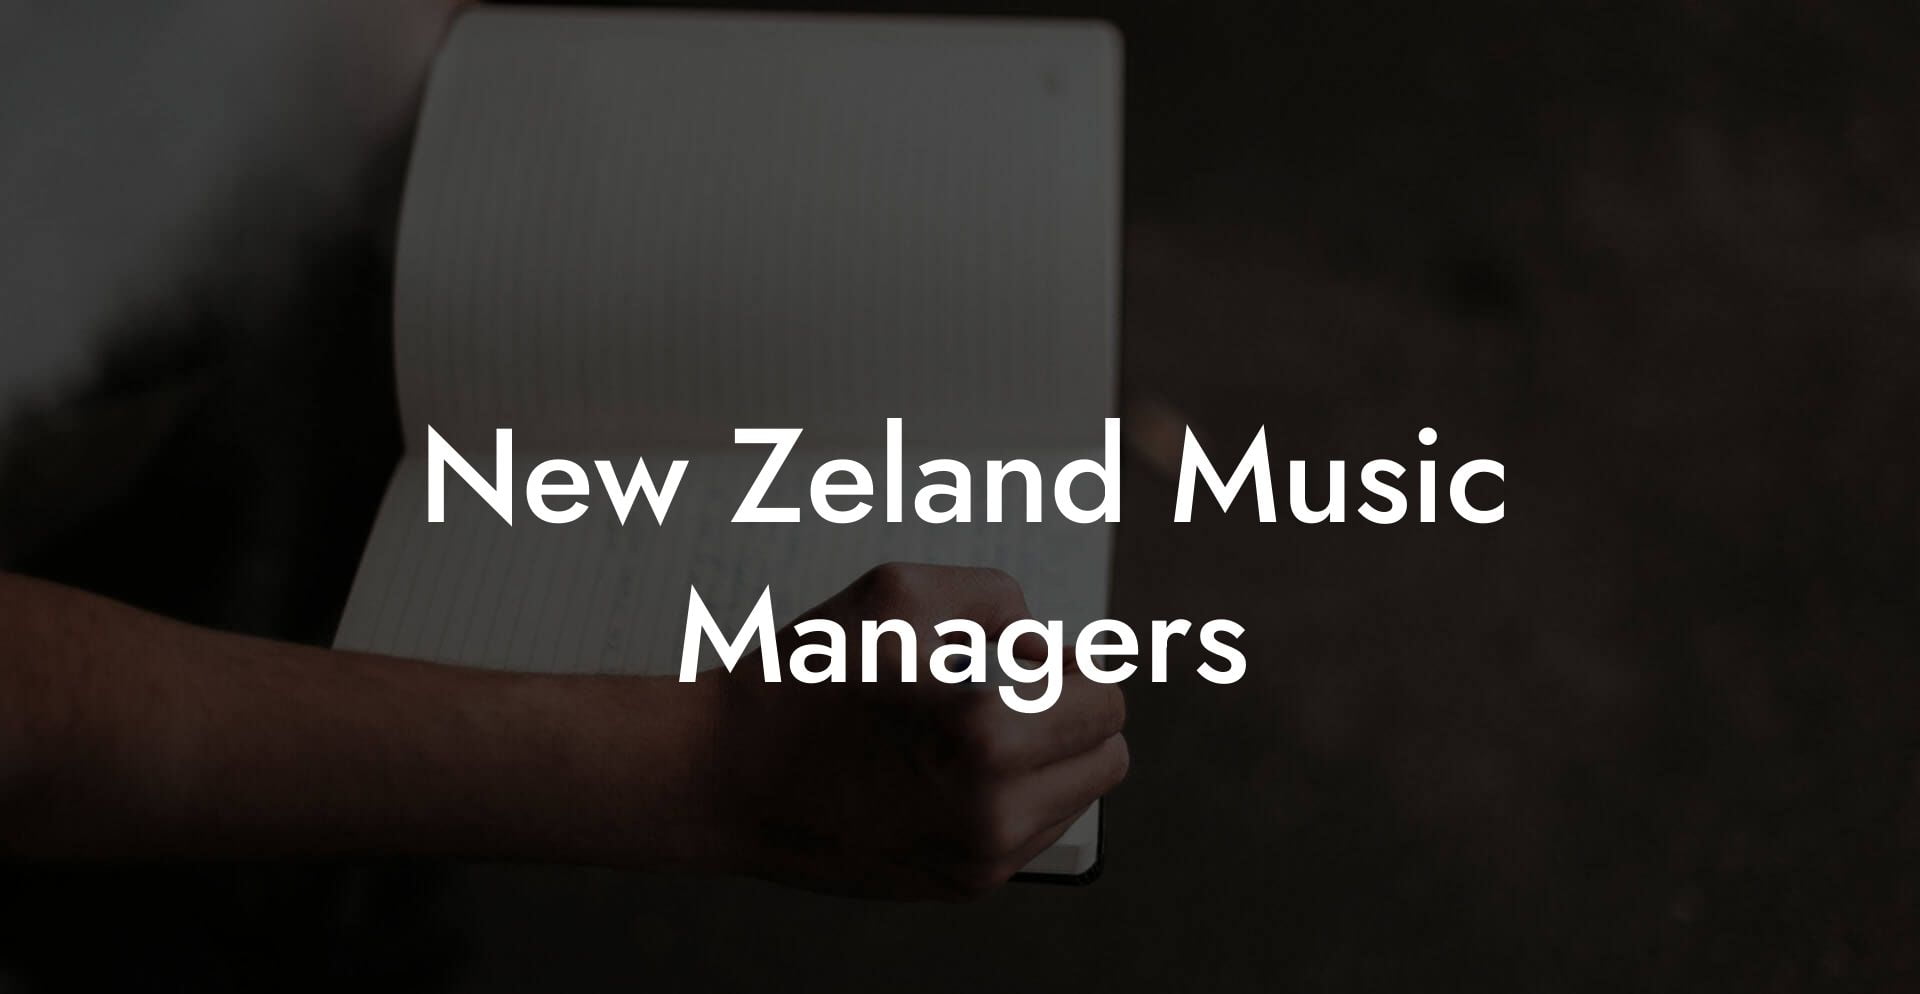 New Zeland Music Managers